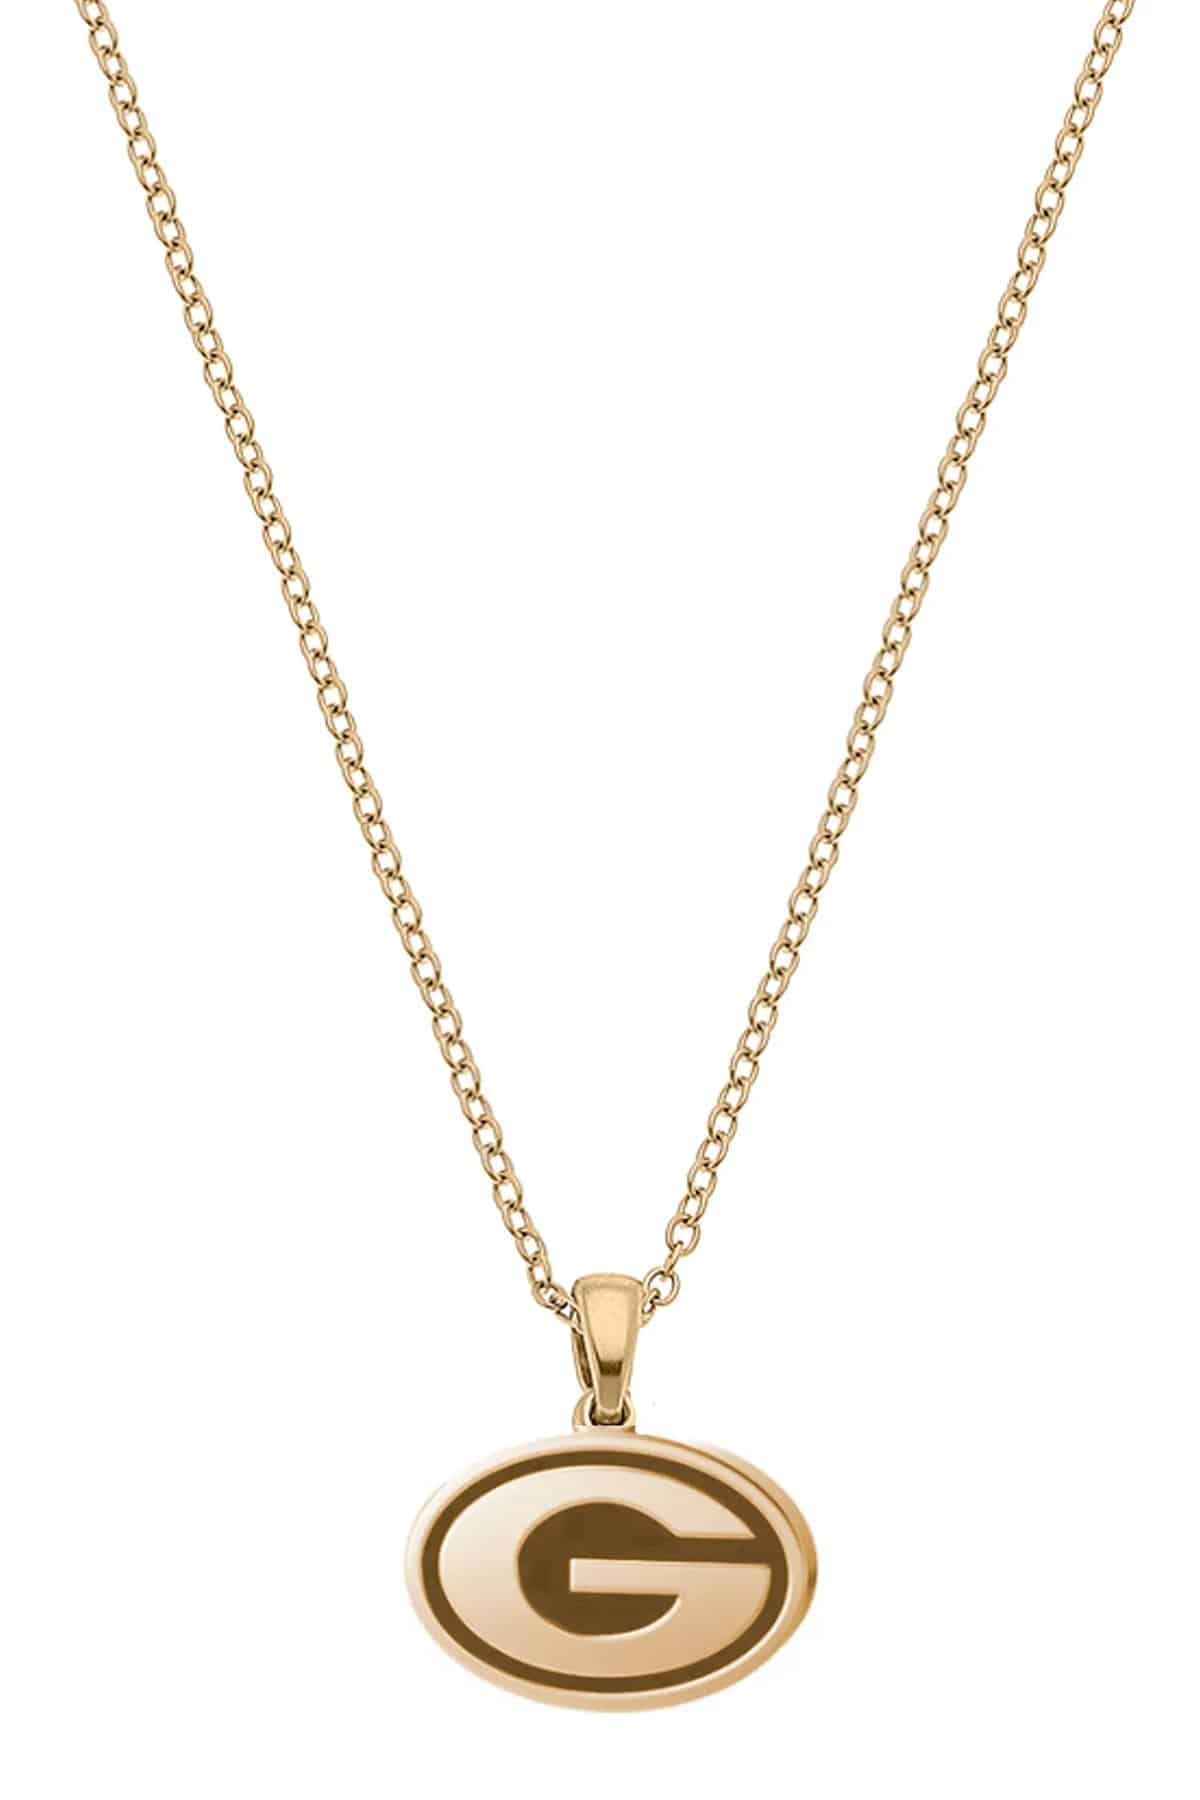 Georgia Bulldogs 24K Gold Plated Pendant Necklace - Findlay Rowe Designs